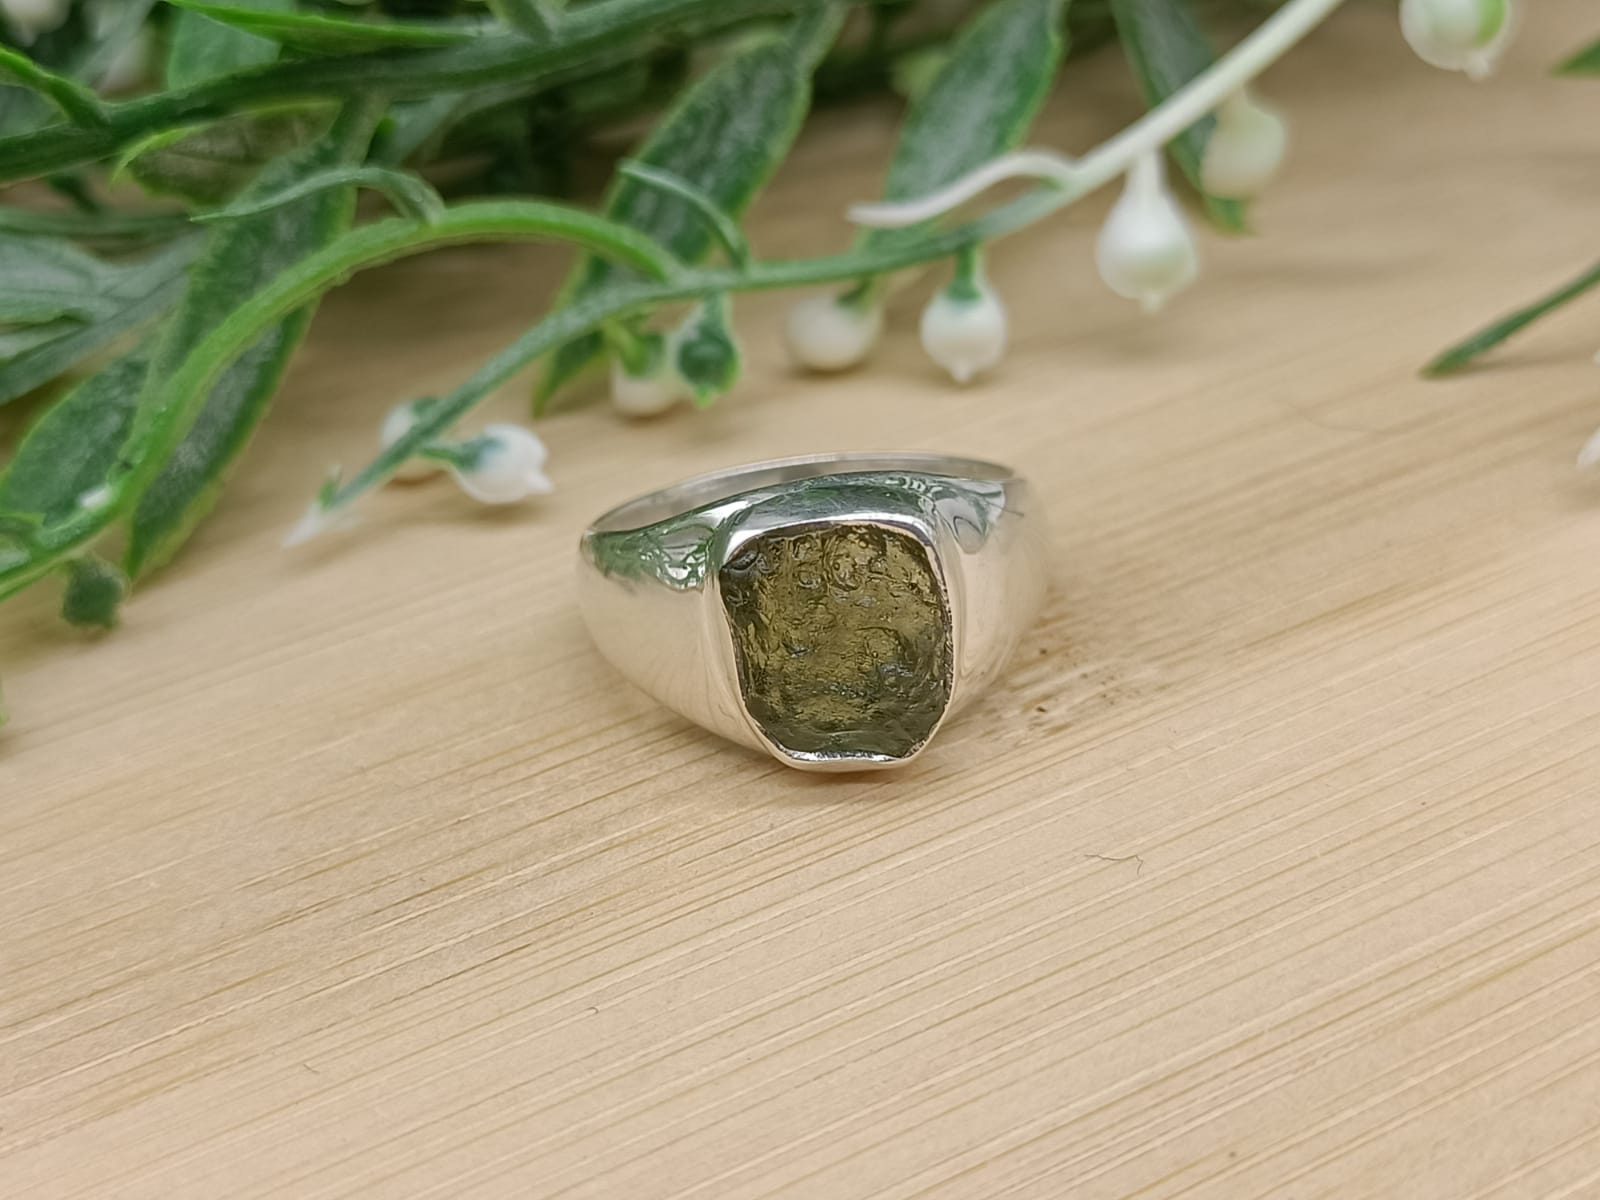 Authentic Moldavite Solid 925 Sterling Silver Ring Size 9 or R1/2 10x8mm Crystal Wellness